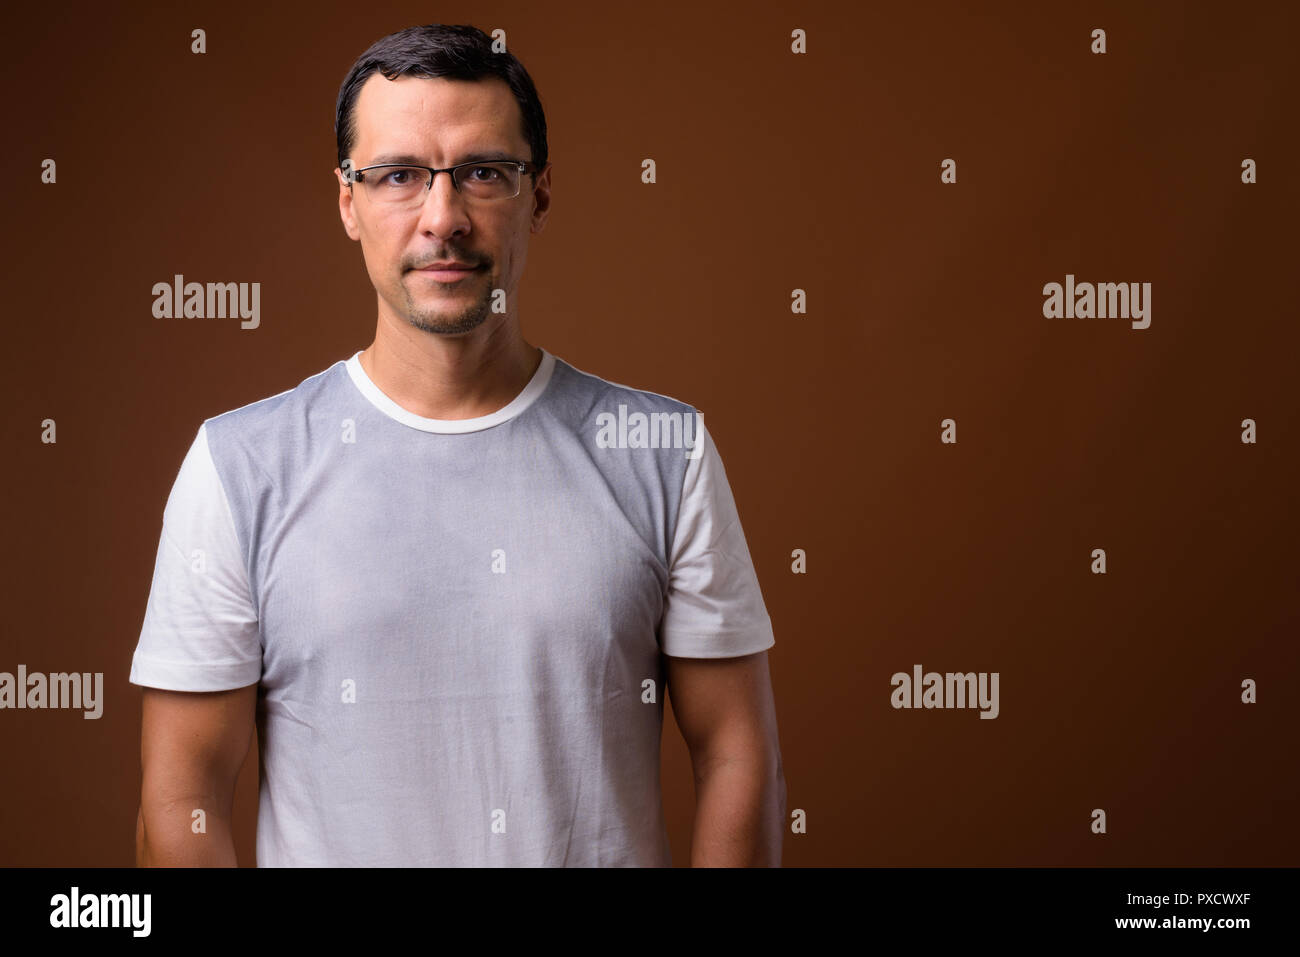 Portrait of handsome man against brown background Stock Photo